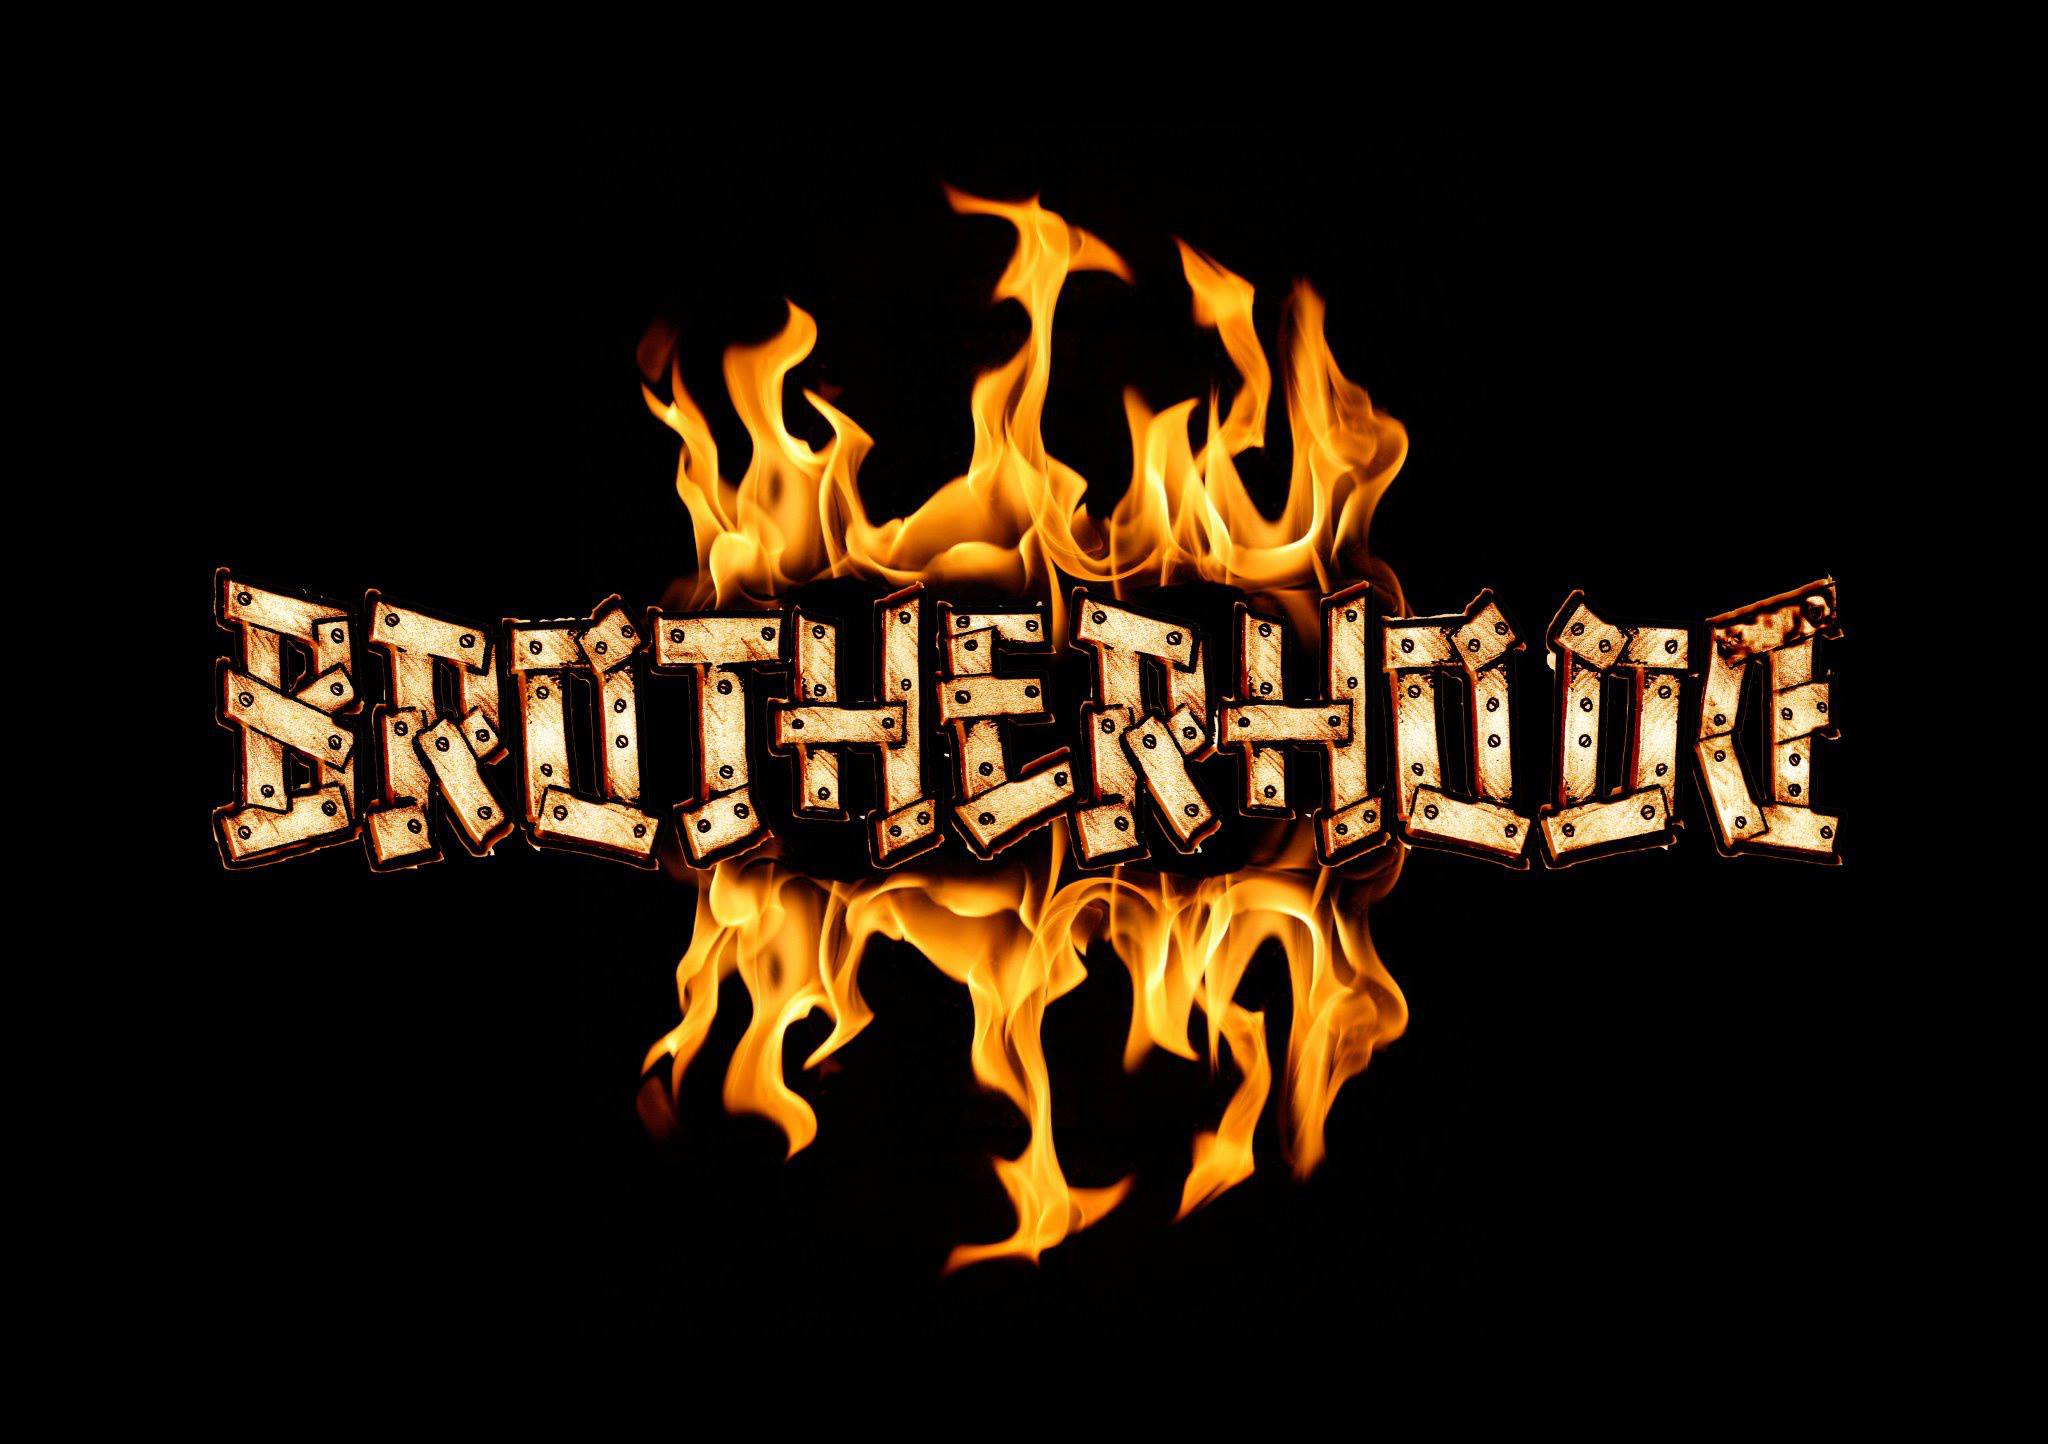 BrOTHERHOOD Backgrounds, Compatible - PC, Mobile, Gadgets| 2048x1444 px